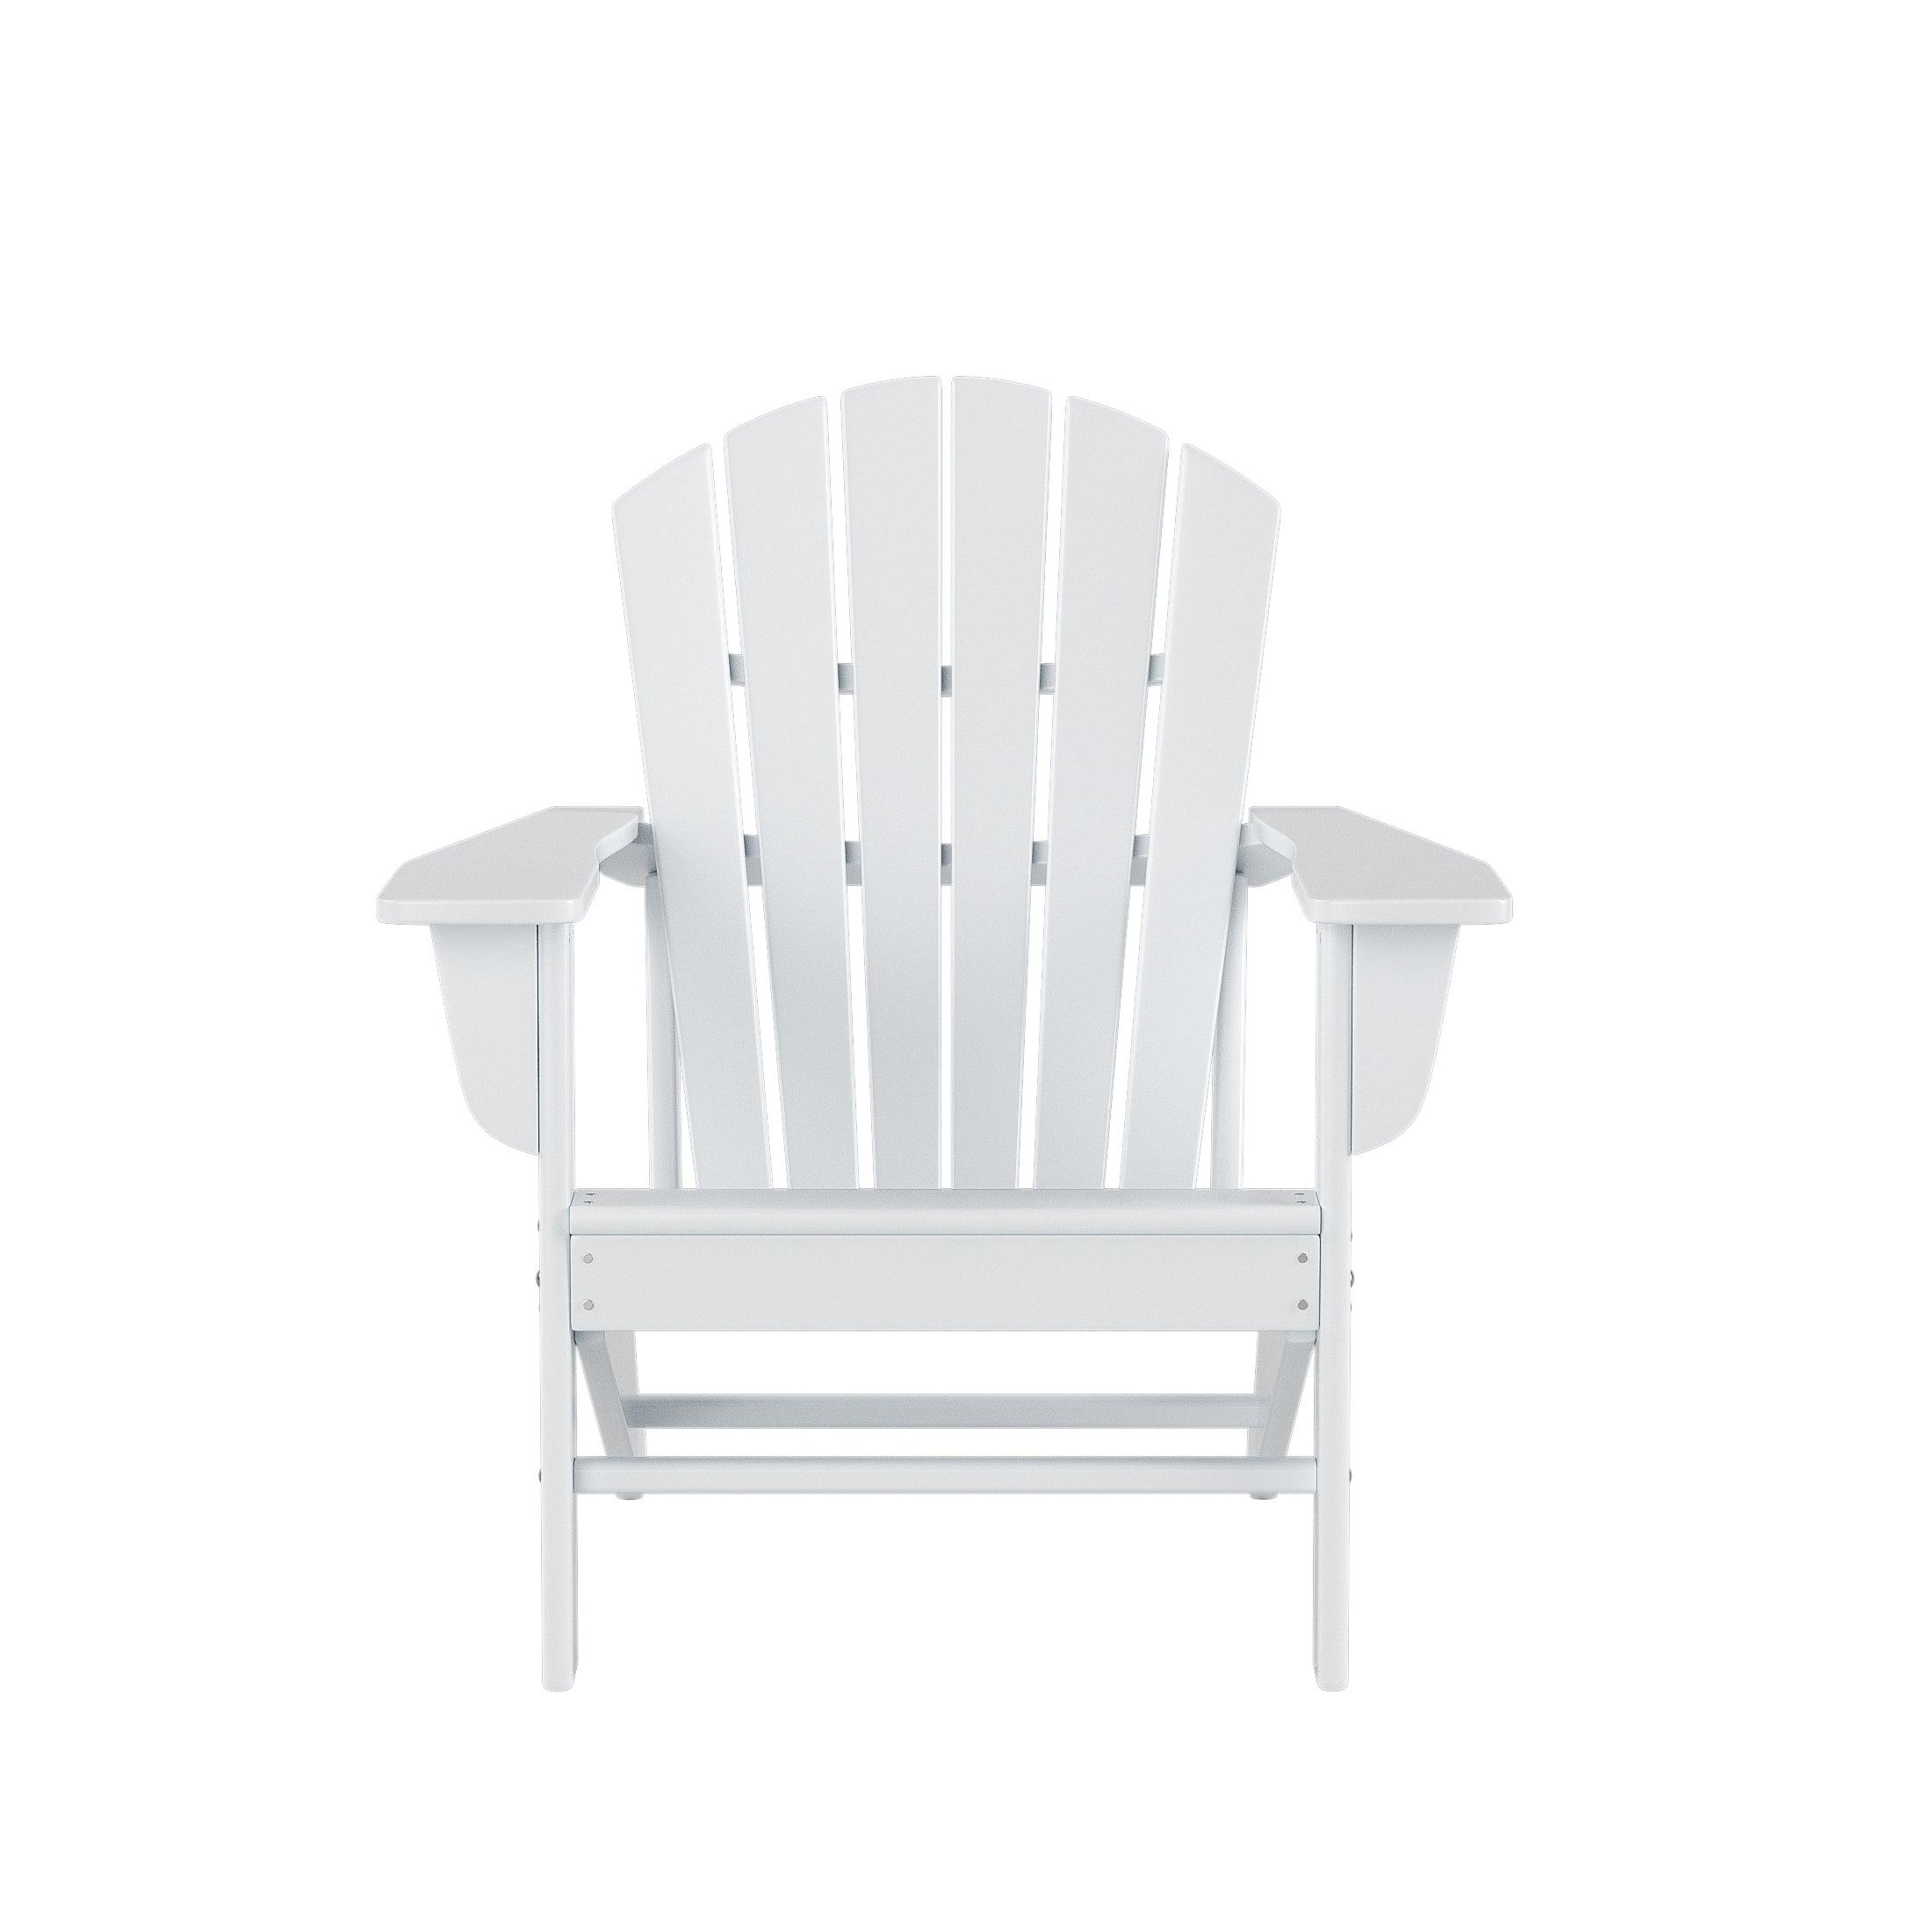 Costaelm Outdoor Adirondack Chair With Ottoman 2-Piece Set, White